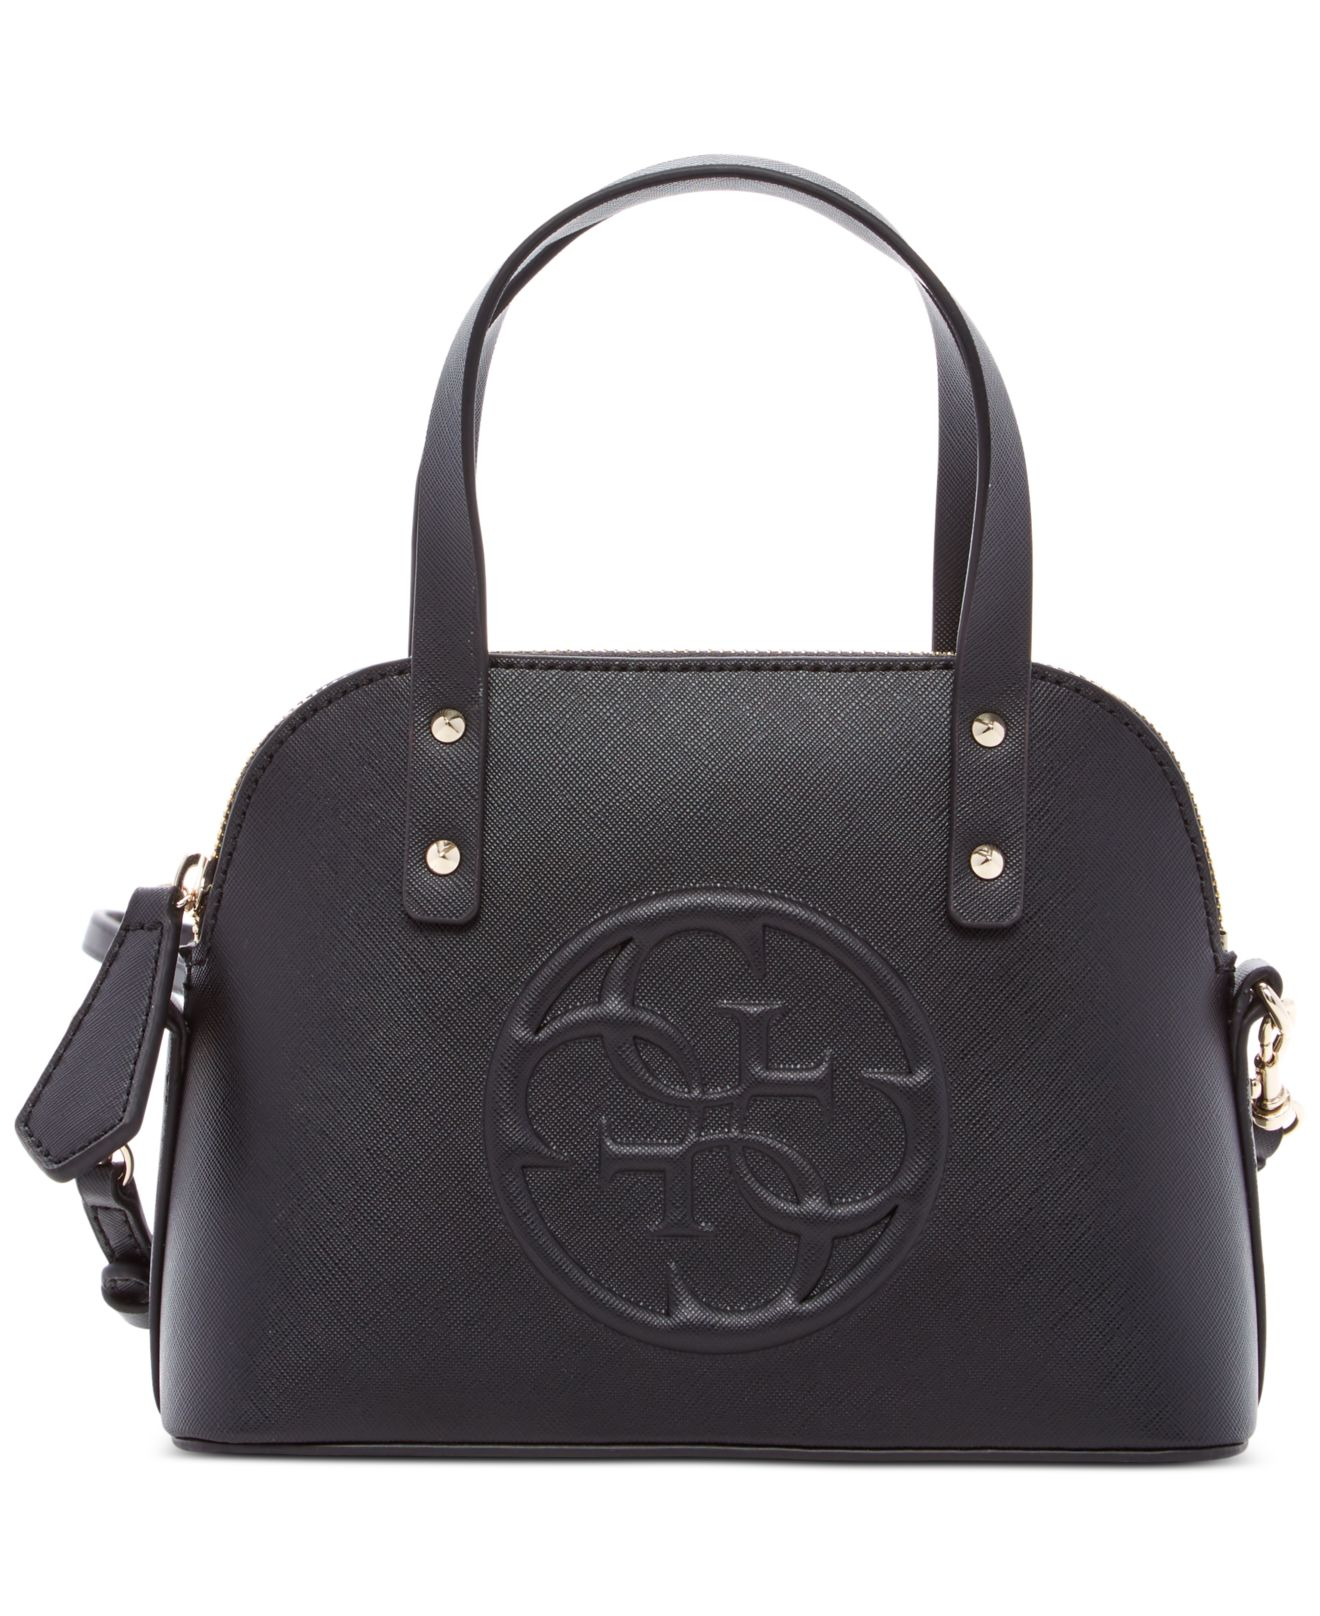 Guess Korry Petite Dome Satchel in Black - Lyst